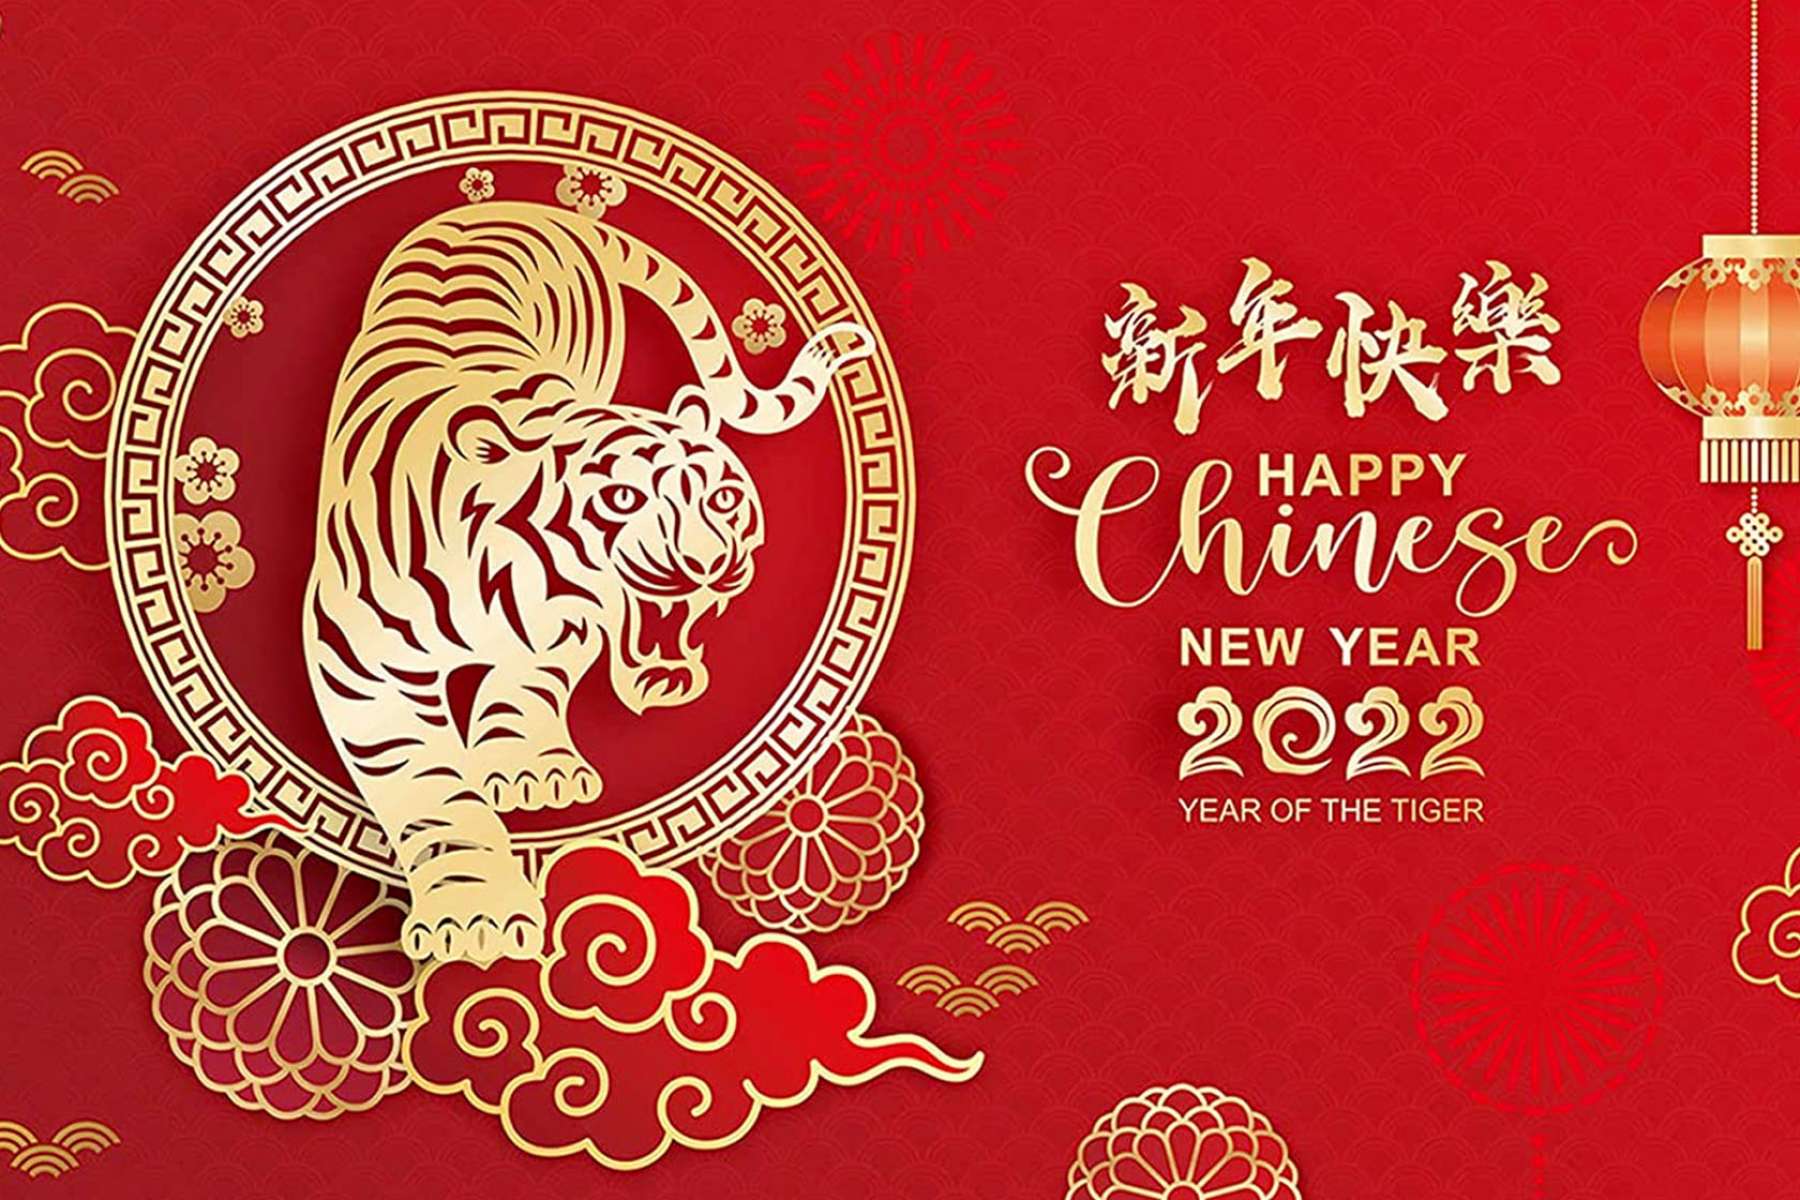 2022 year chinese images new